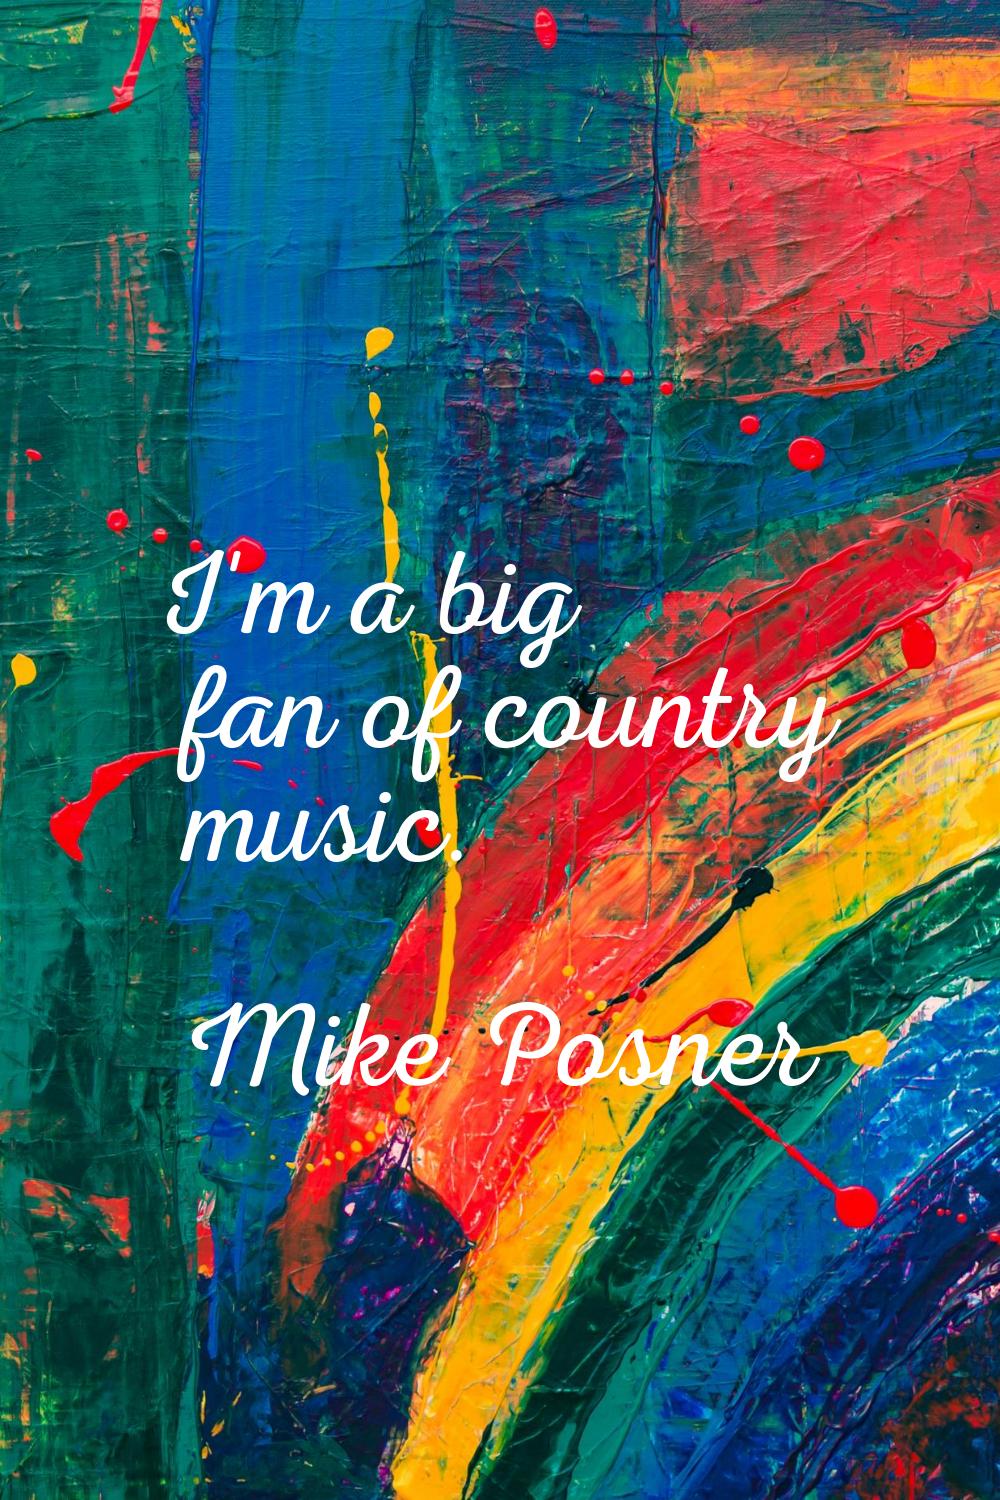 I'm a big fan of country music.